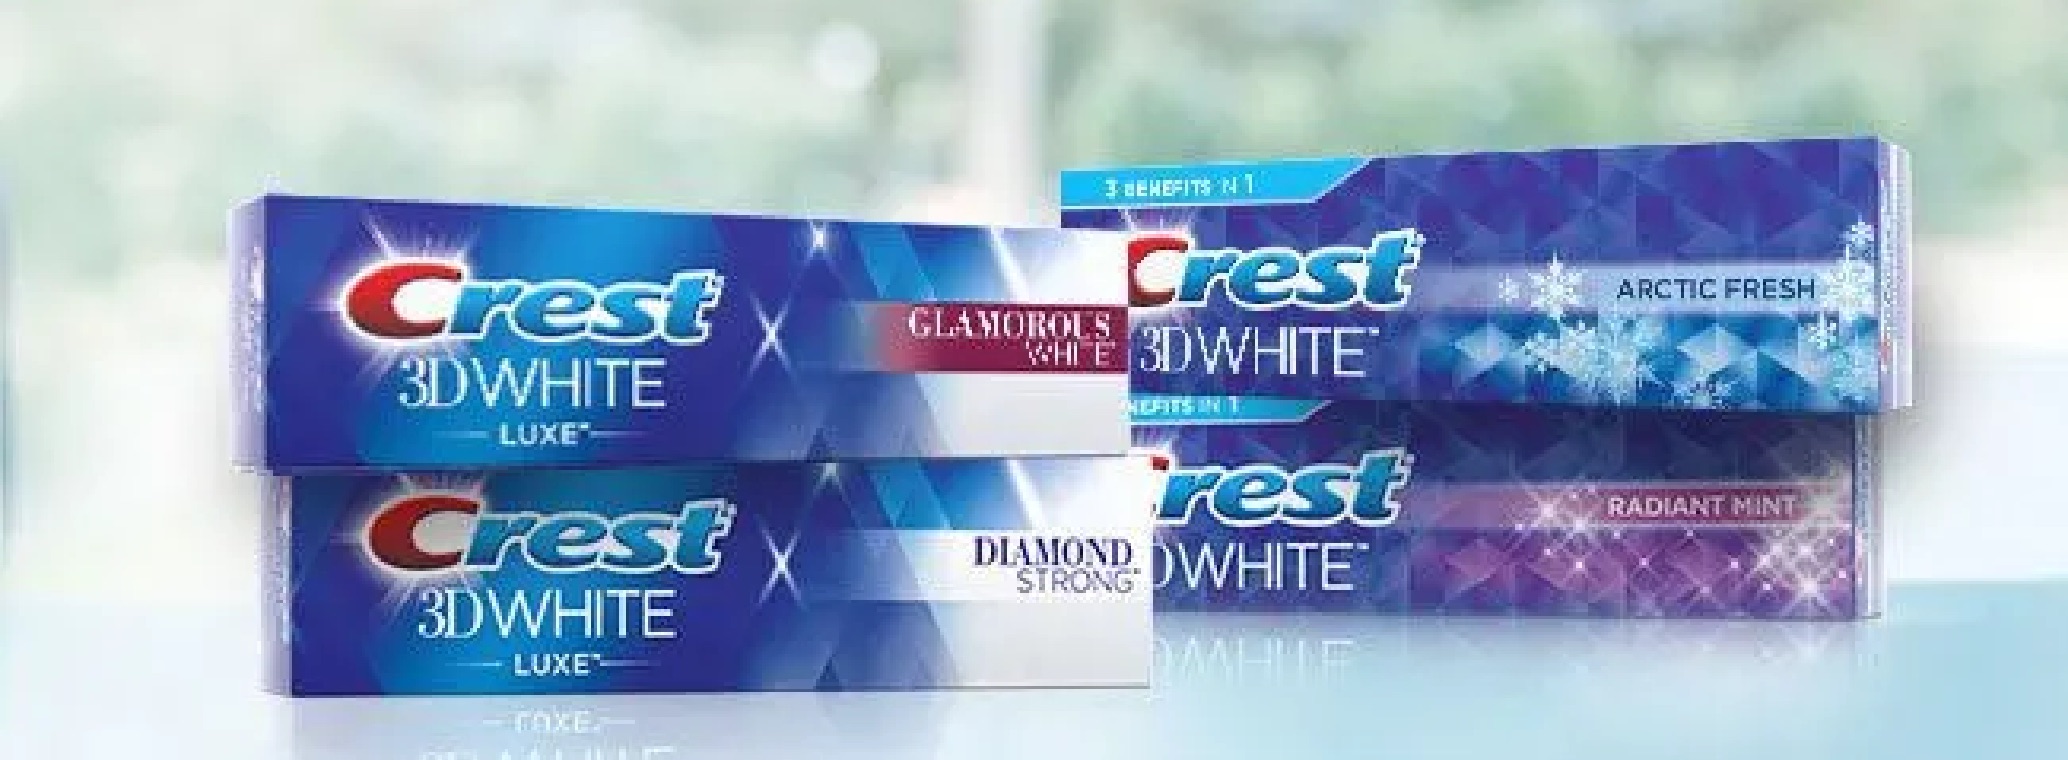 Crest’s Best Toothpastes for 2021